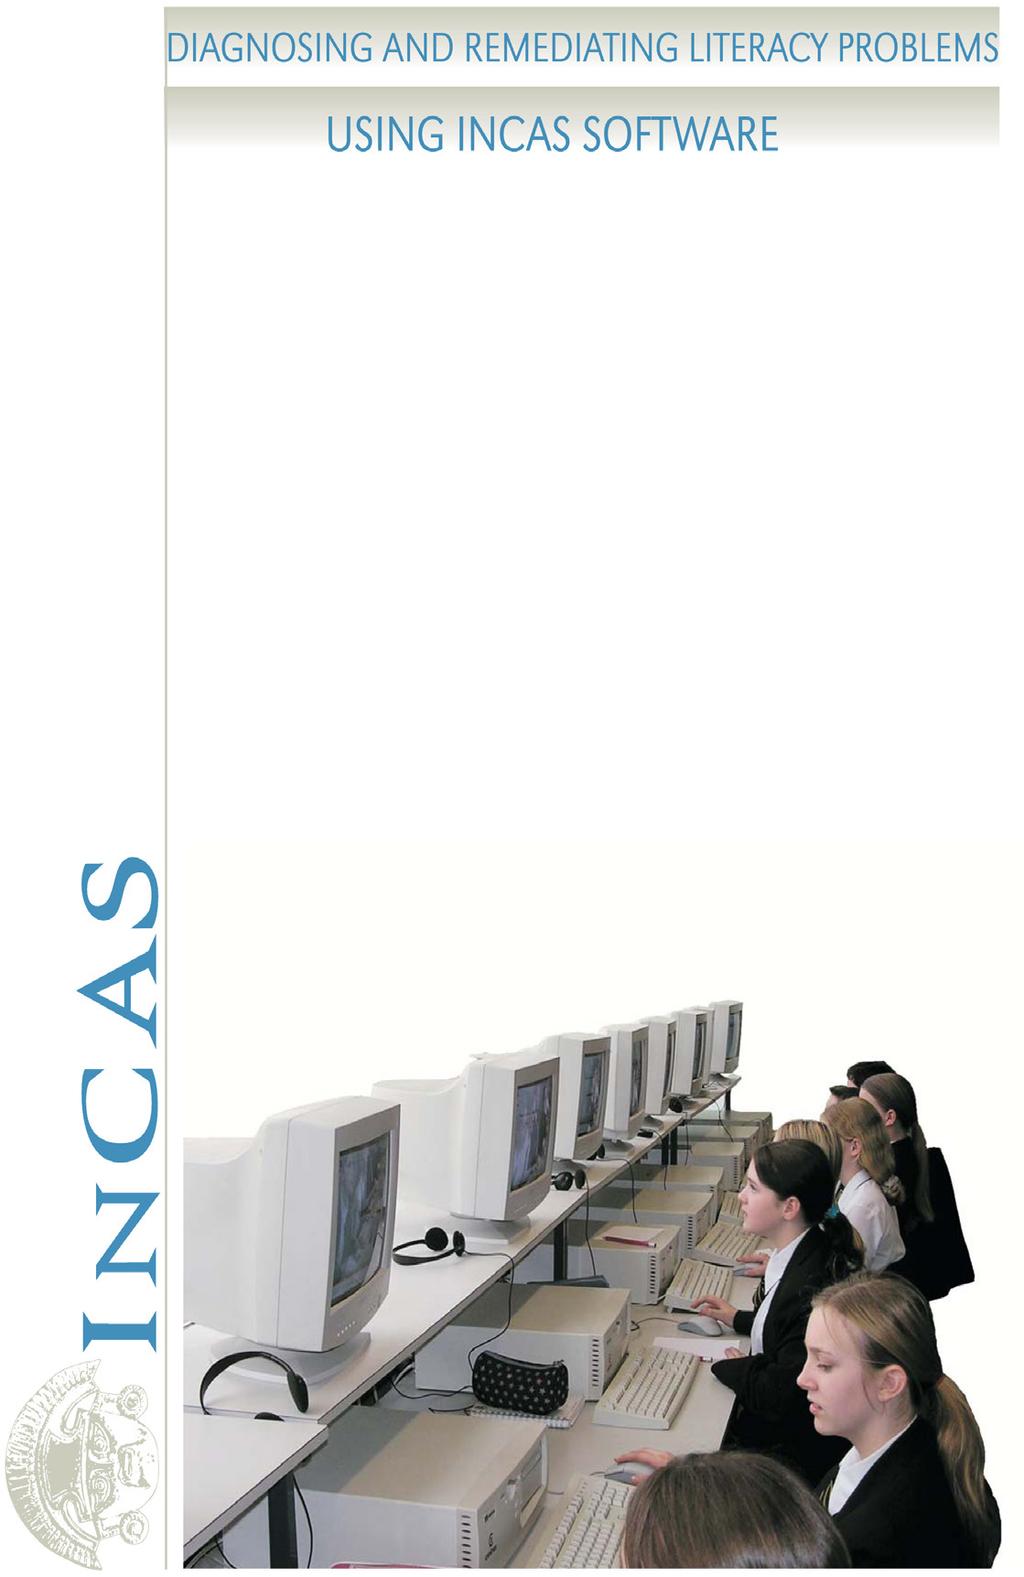 InCAS testing provides comprehensive information on individual students and classes.